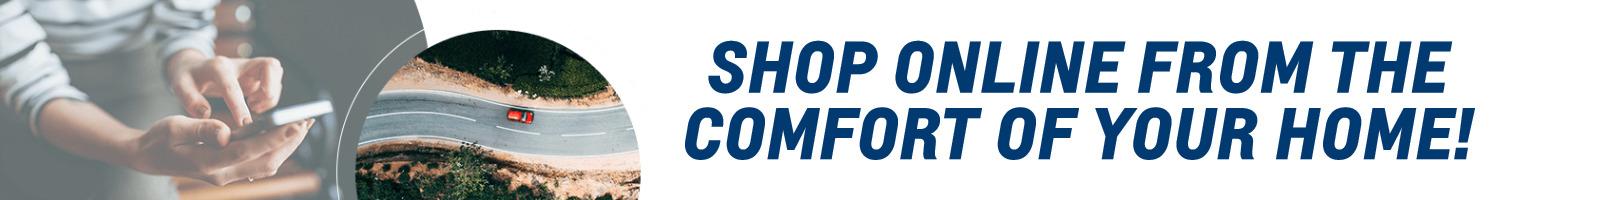 SHOP ONLINE FROM THE COMFORT OF YOUR HOME